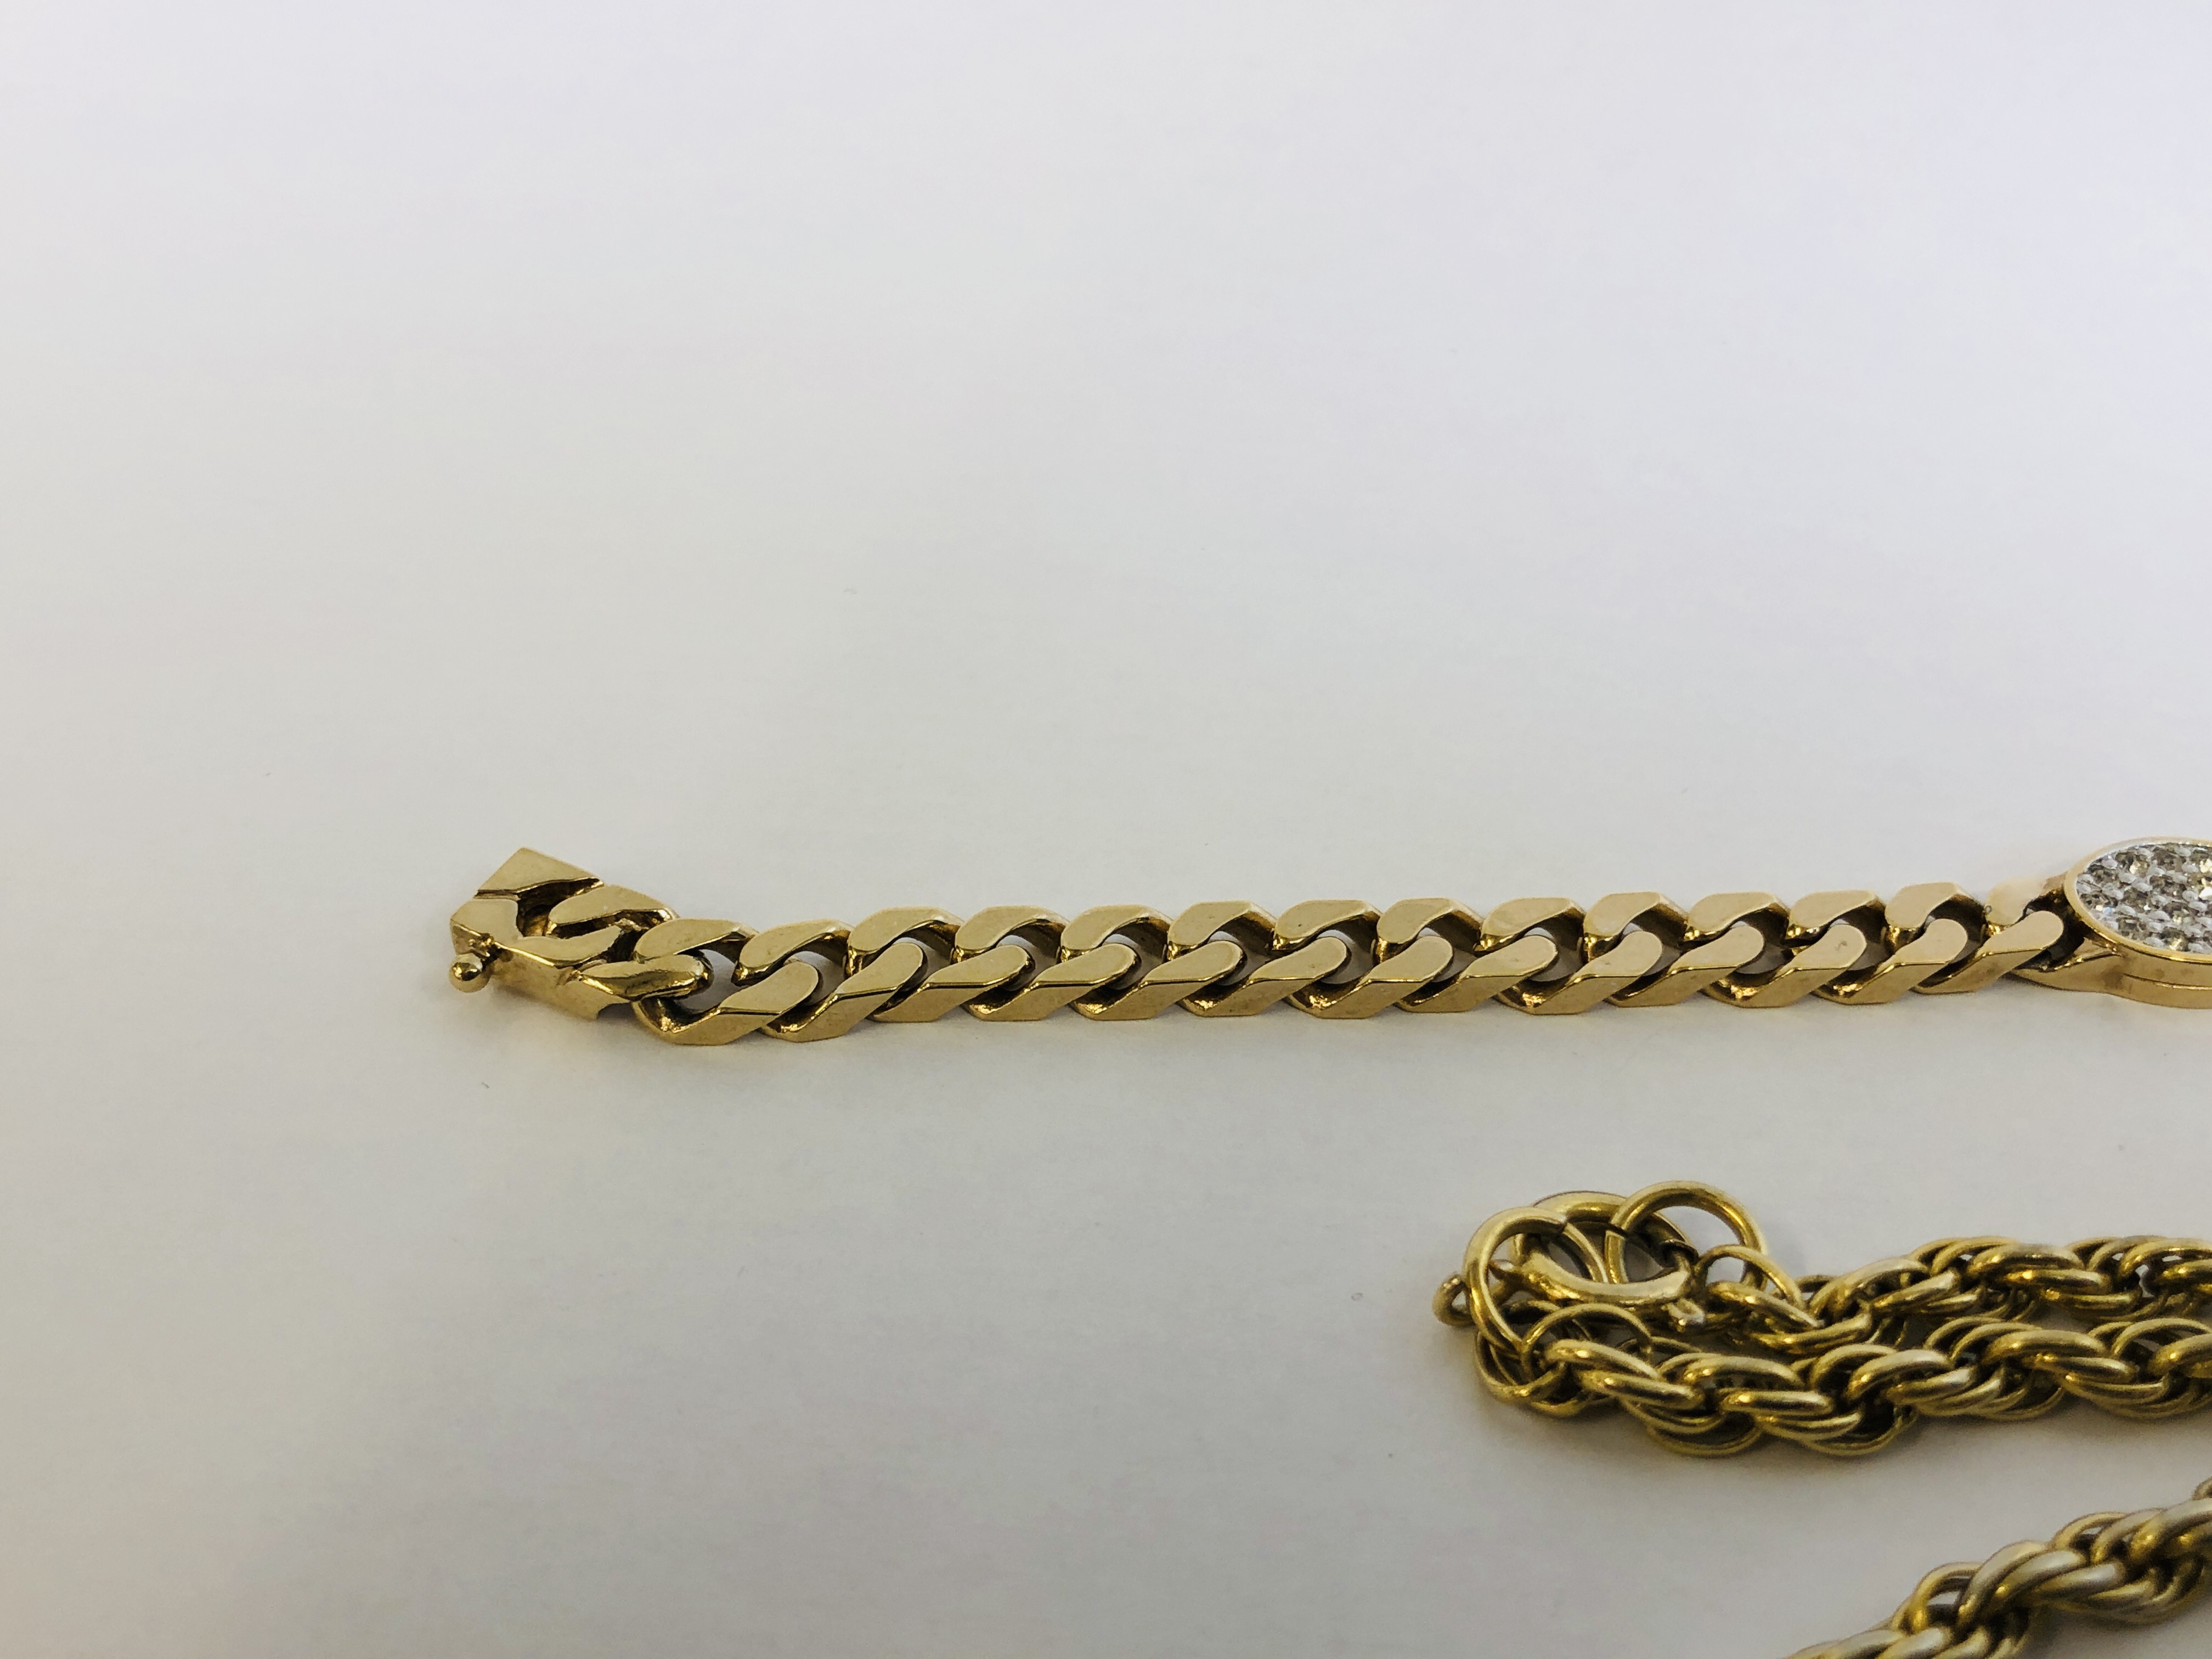 A GOLD TONE COSTUME BRACELET MARKED "PANETTA" ALONG WITH AN UNMARKED ROPE TWIST NECKLACE. - Image 5 of 13